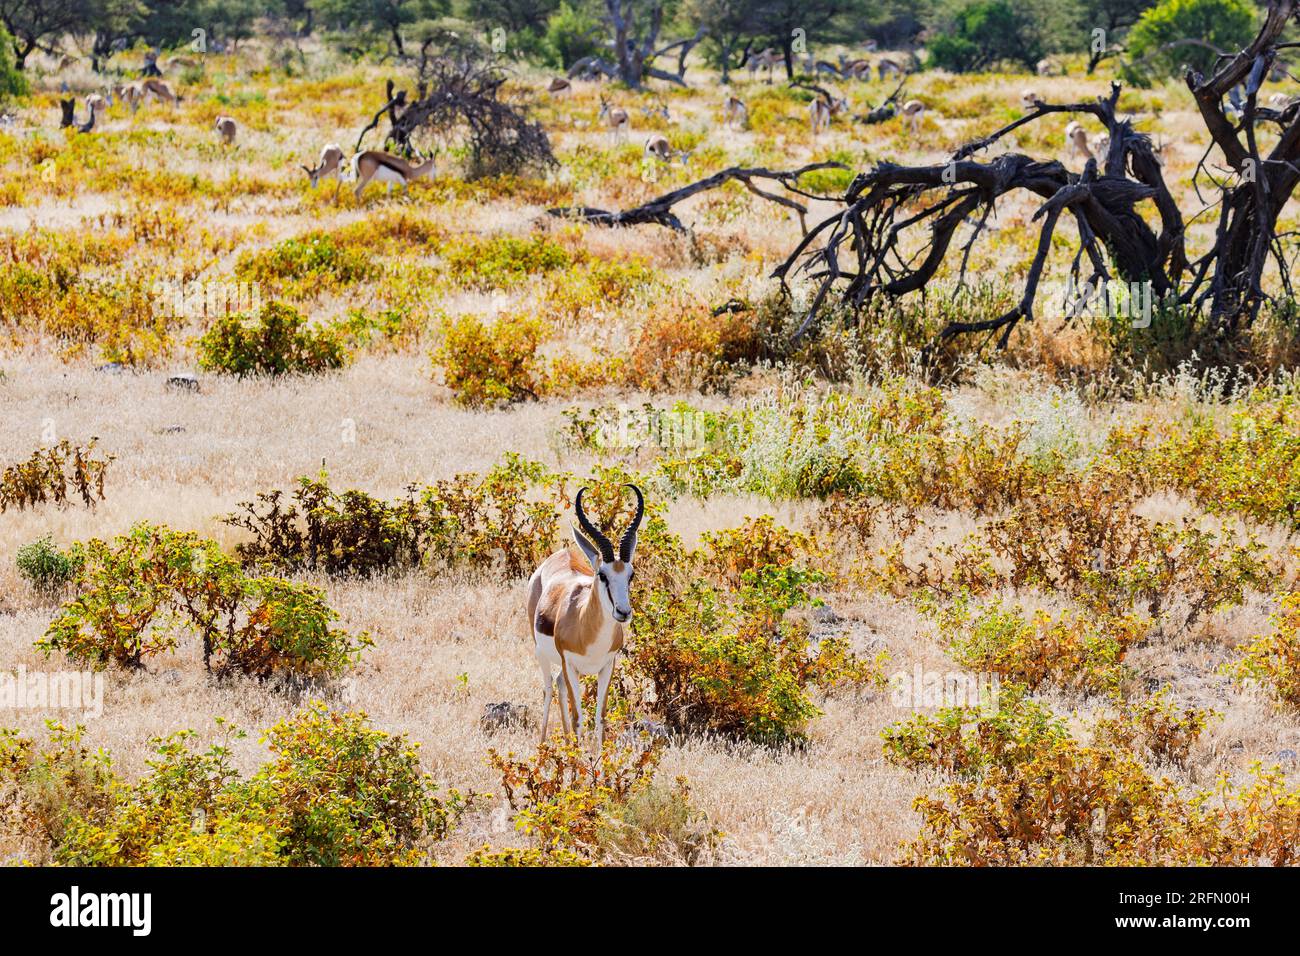 A springbok antelope backlit between grass and bushes in the savannah grassland of Etosha National Park in Namibia, Africa Stock Photo